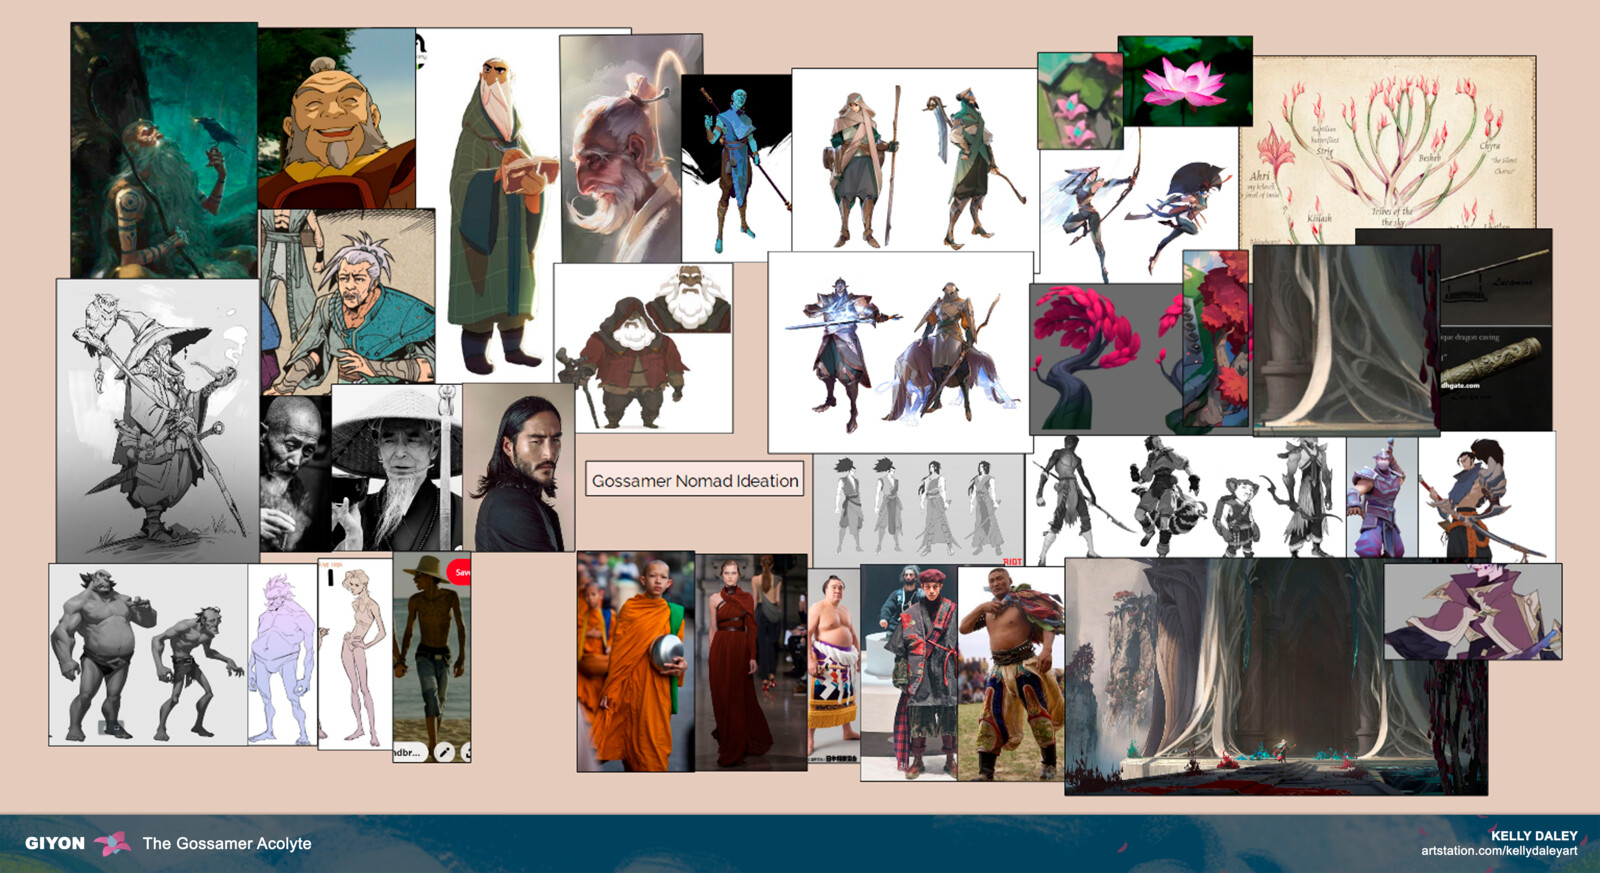 The next step towards visualizing Giyon was to grab references of Ionian characters, textures + real life clothes, and images of "old man" characters that successfully exist across entertainment. This aided in starting my ideation process.